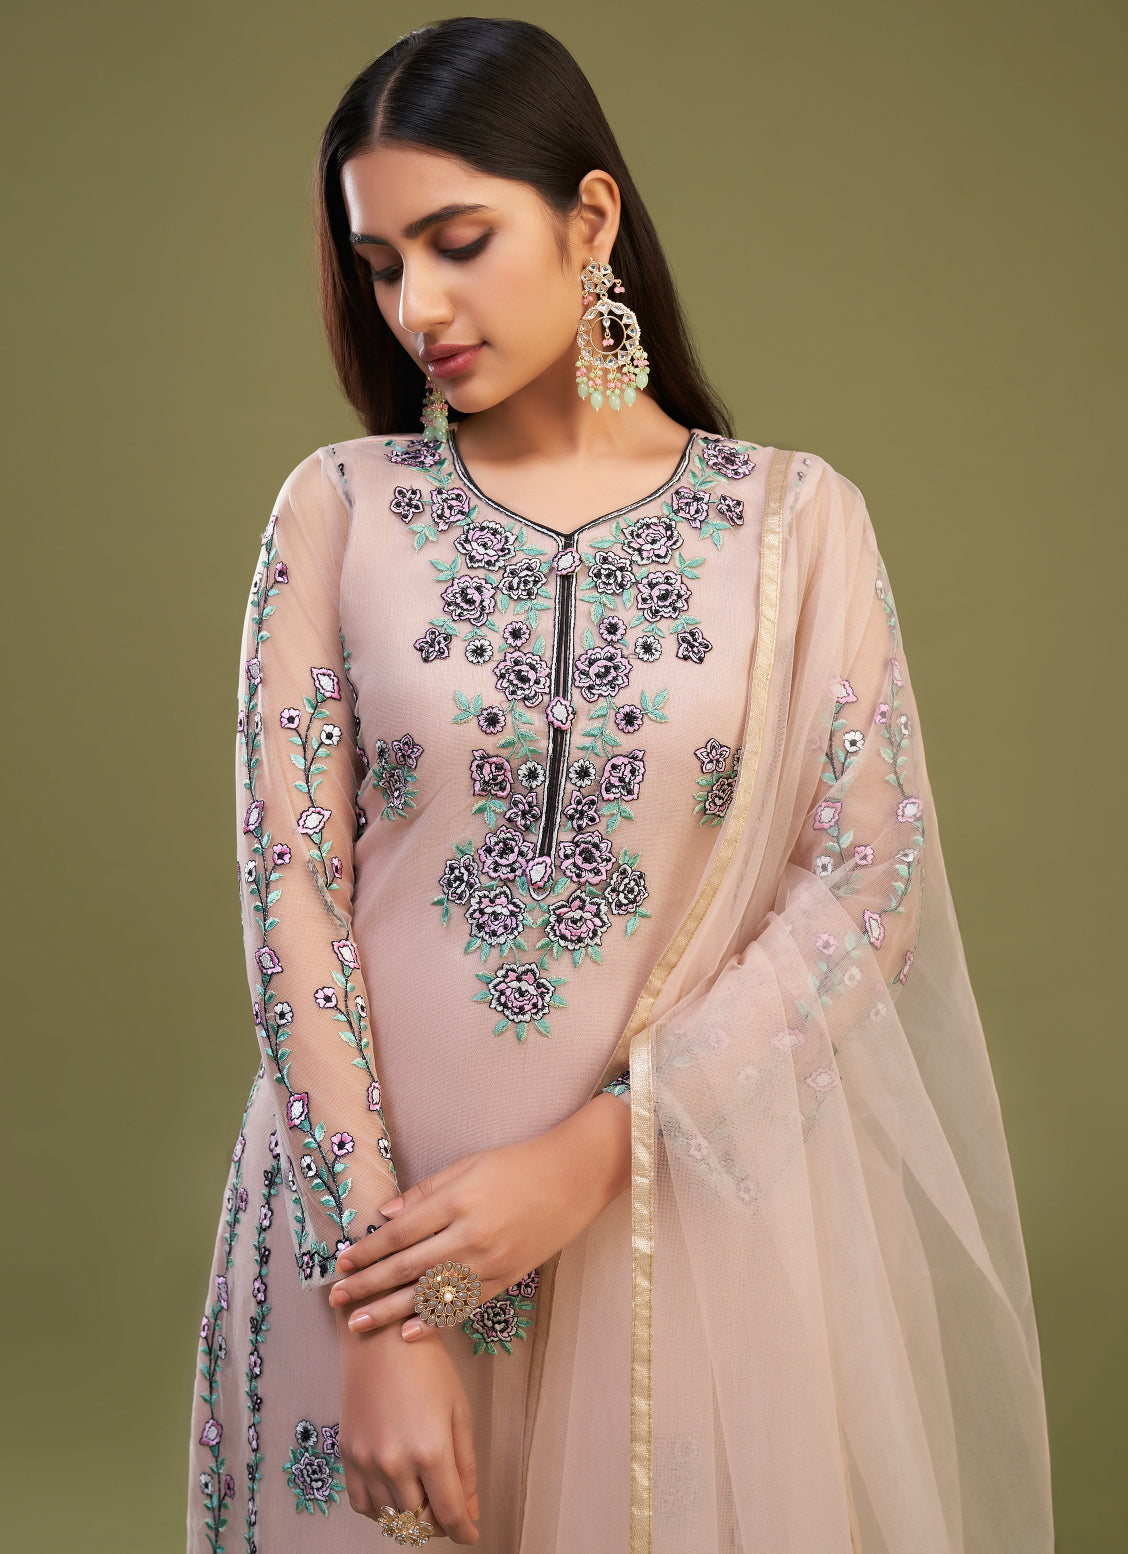 Peach Perfection: Exquisite Multi-Thread Embroidered Salwar Suit for Weddings & Parties